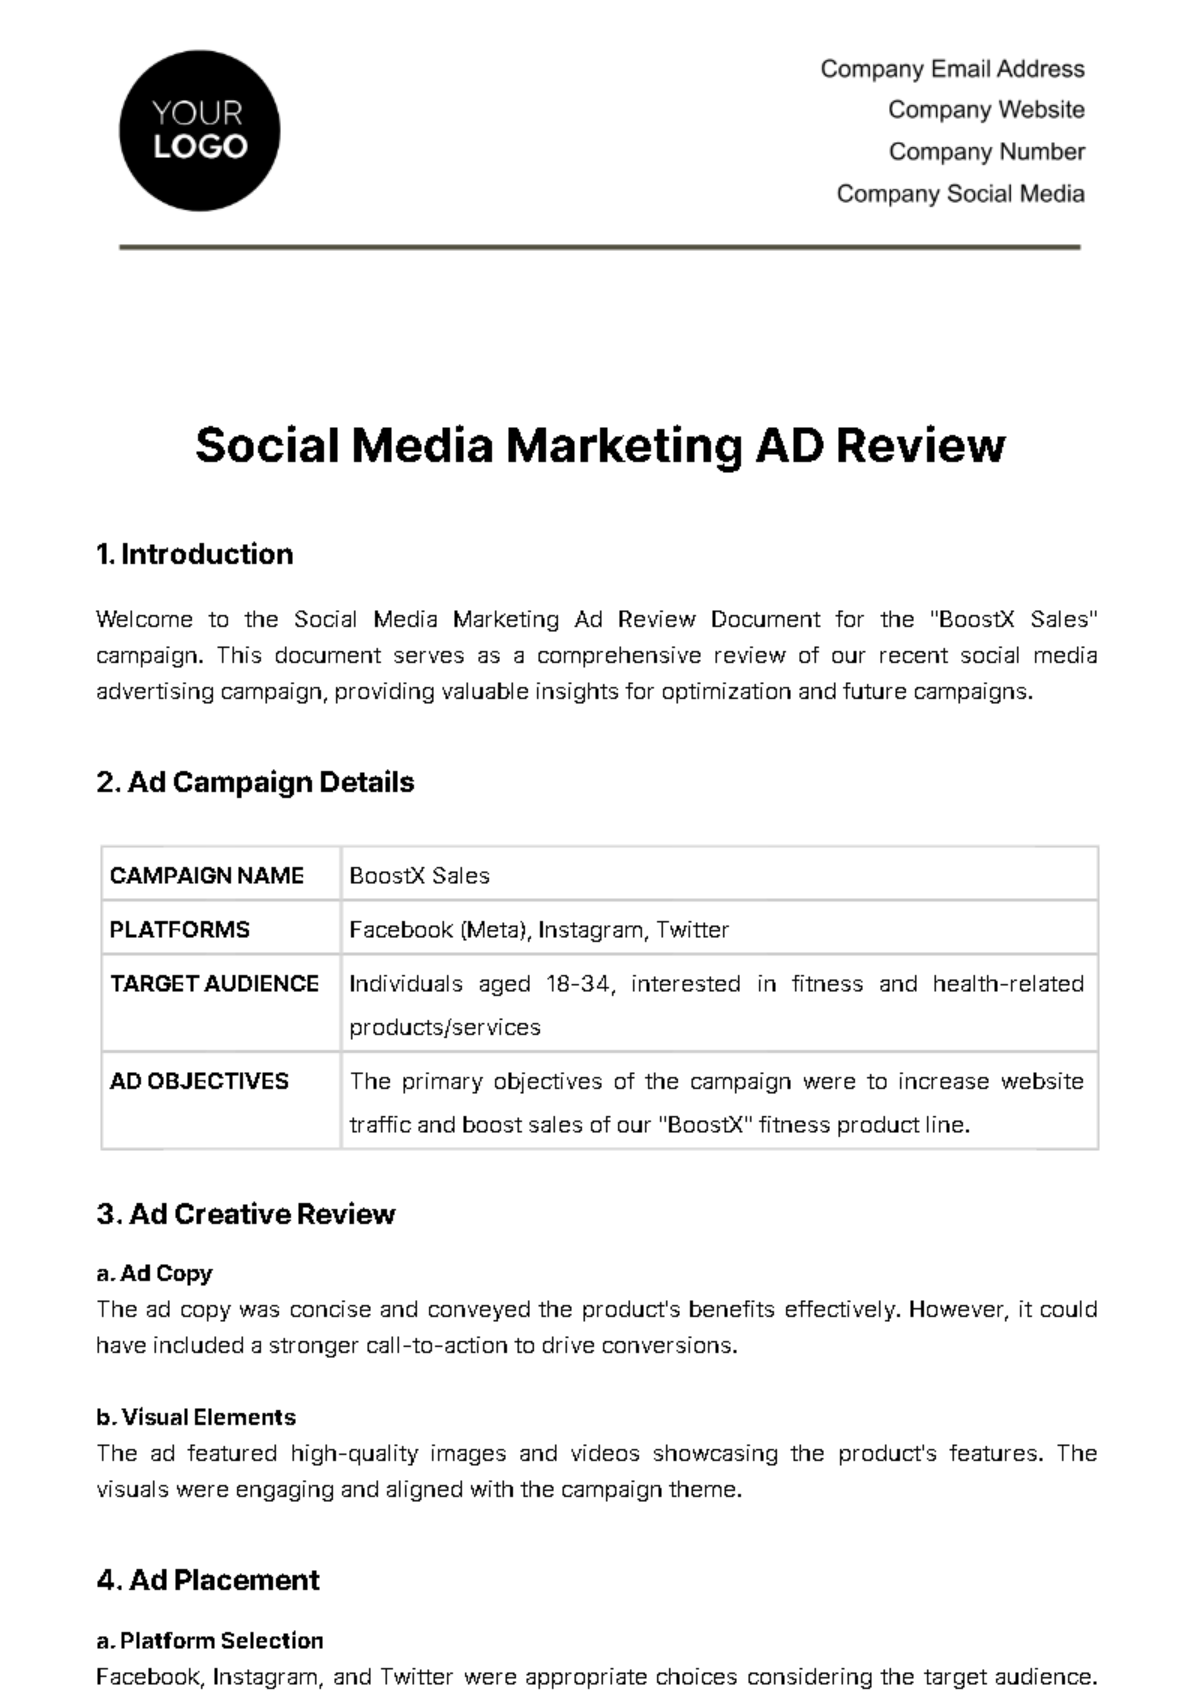 Social Media Marketing Ad Review Template